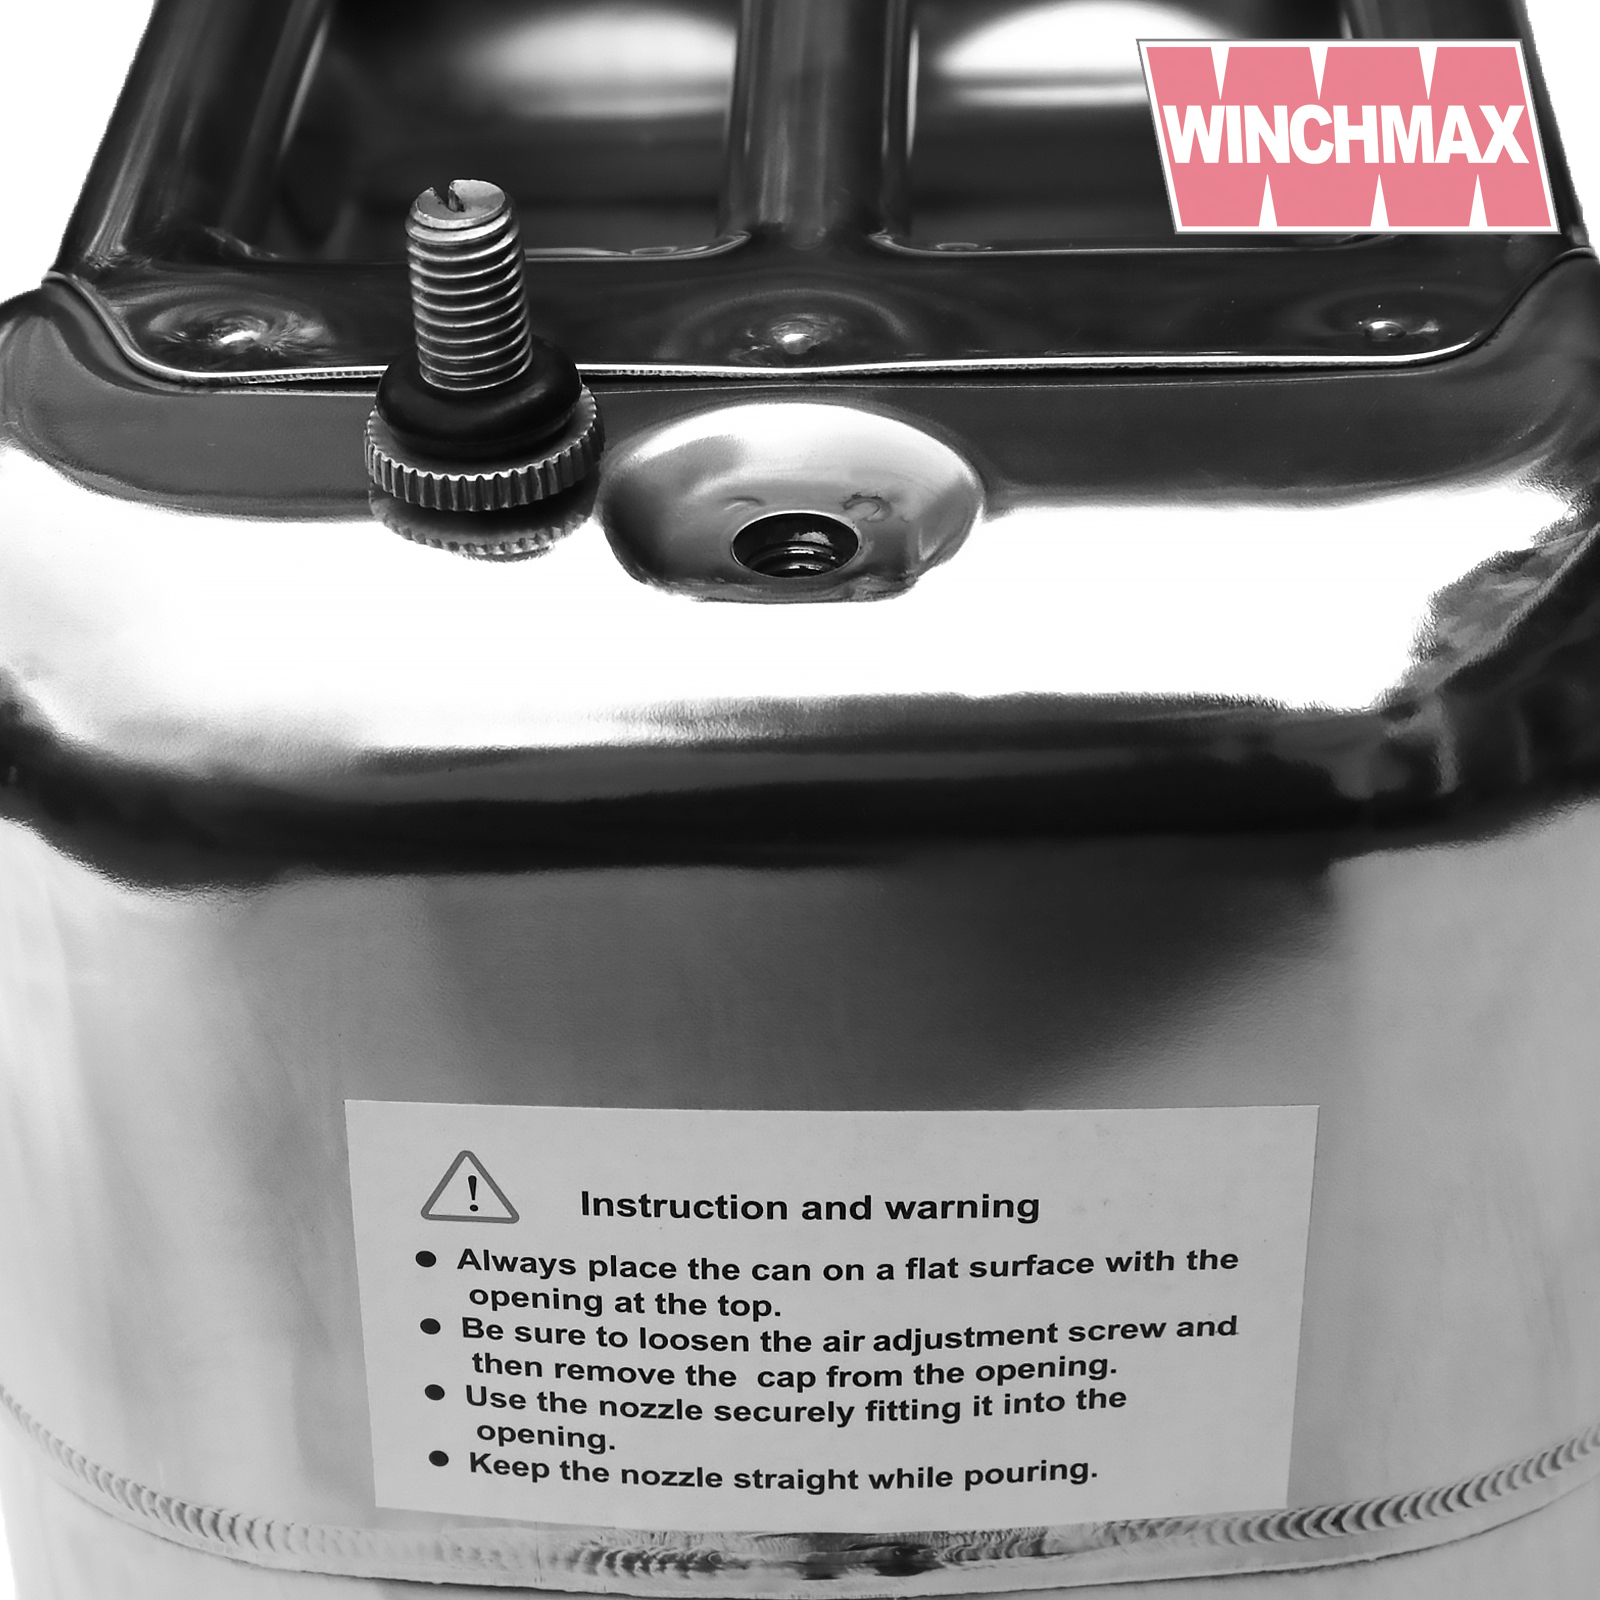 Winchmax 10l Compact Jerry can